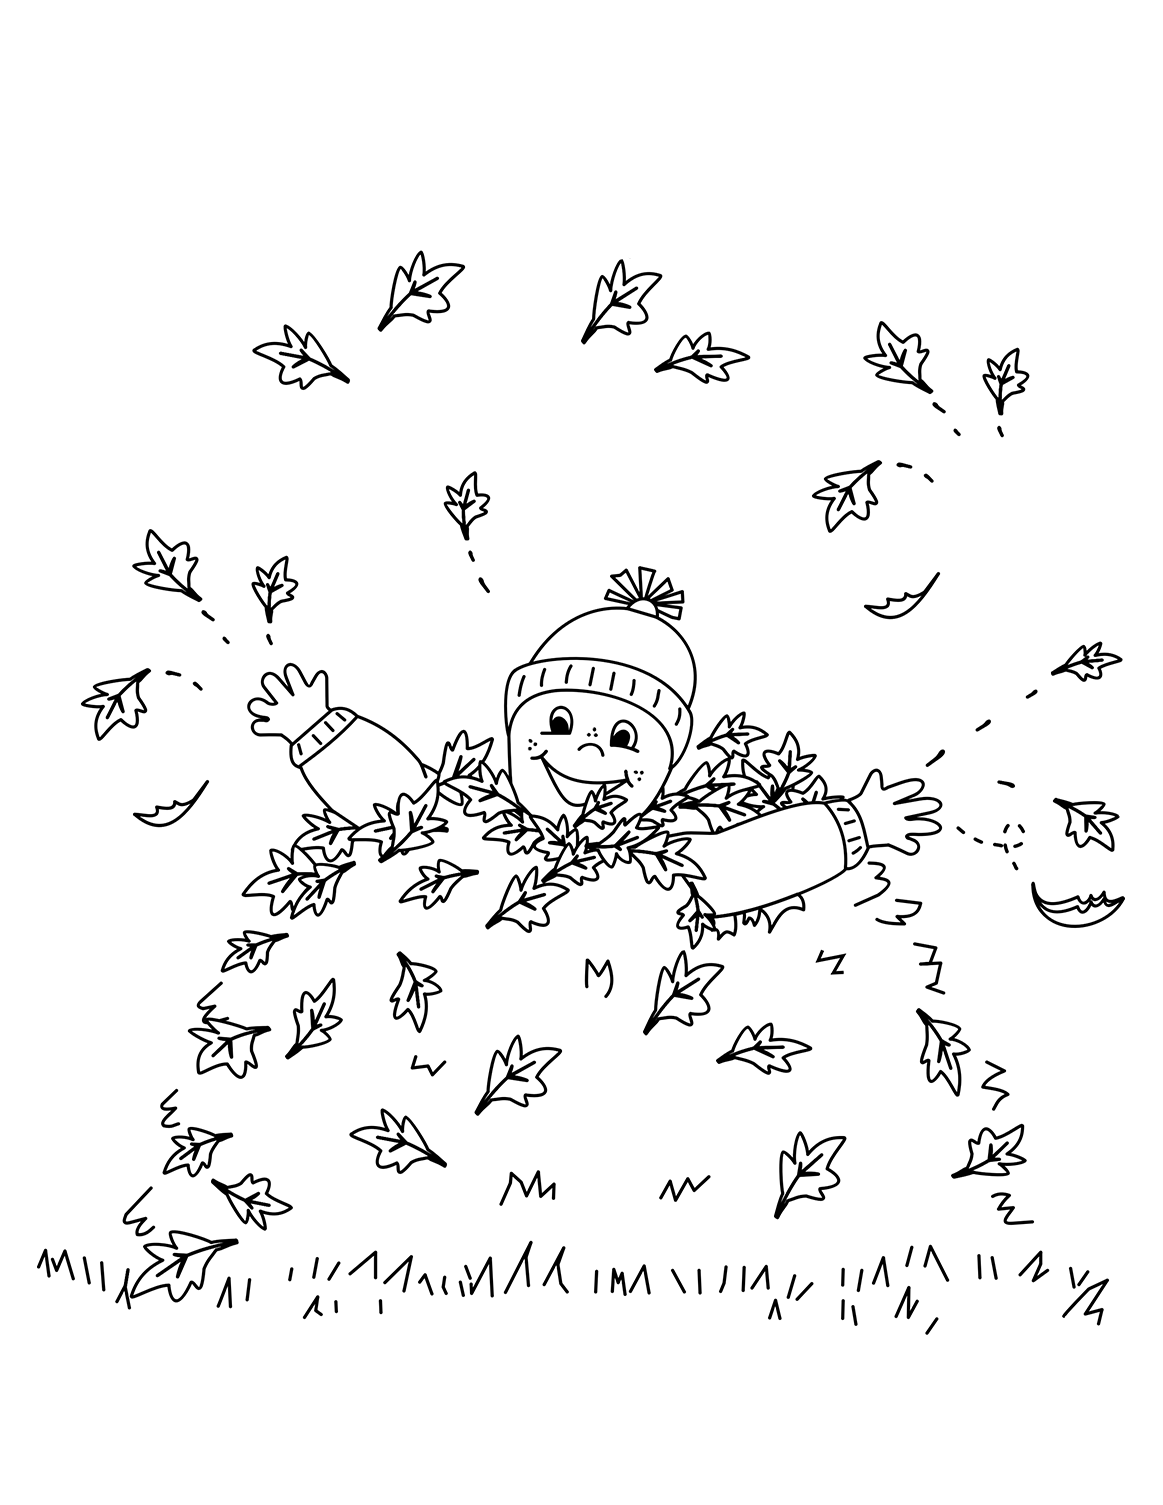 Download 5 Free Fall Coloring Sheets: Autumn Season Coloring Pages - ALL ESL